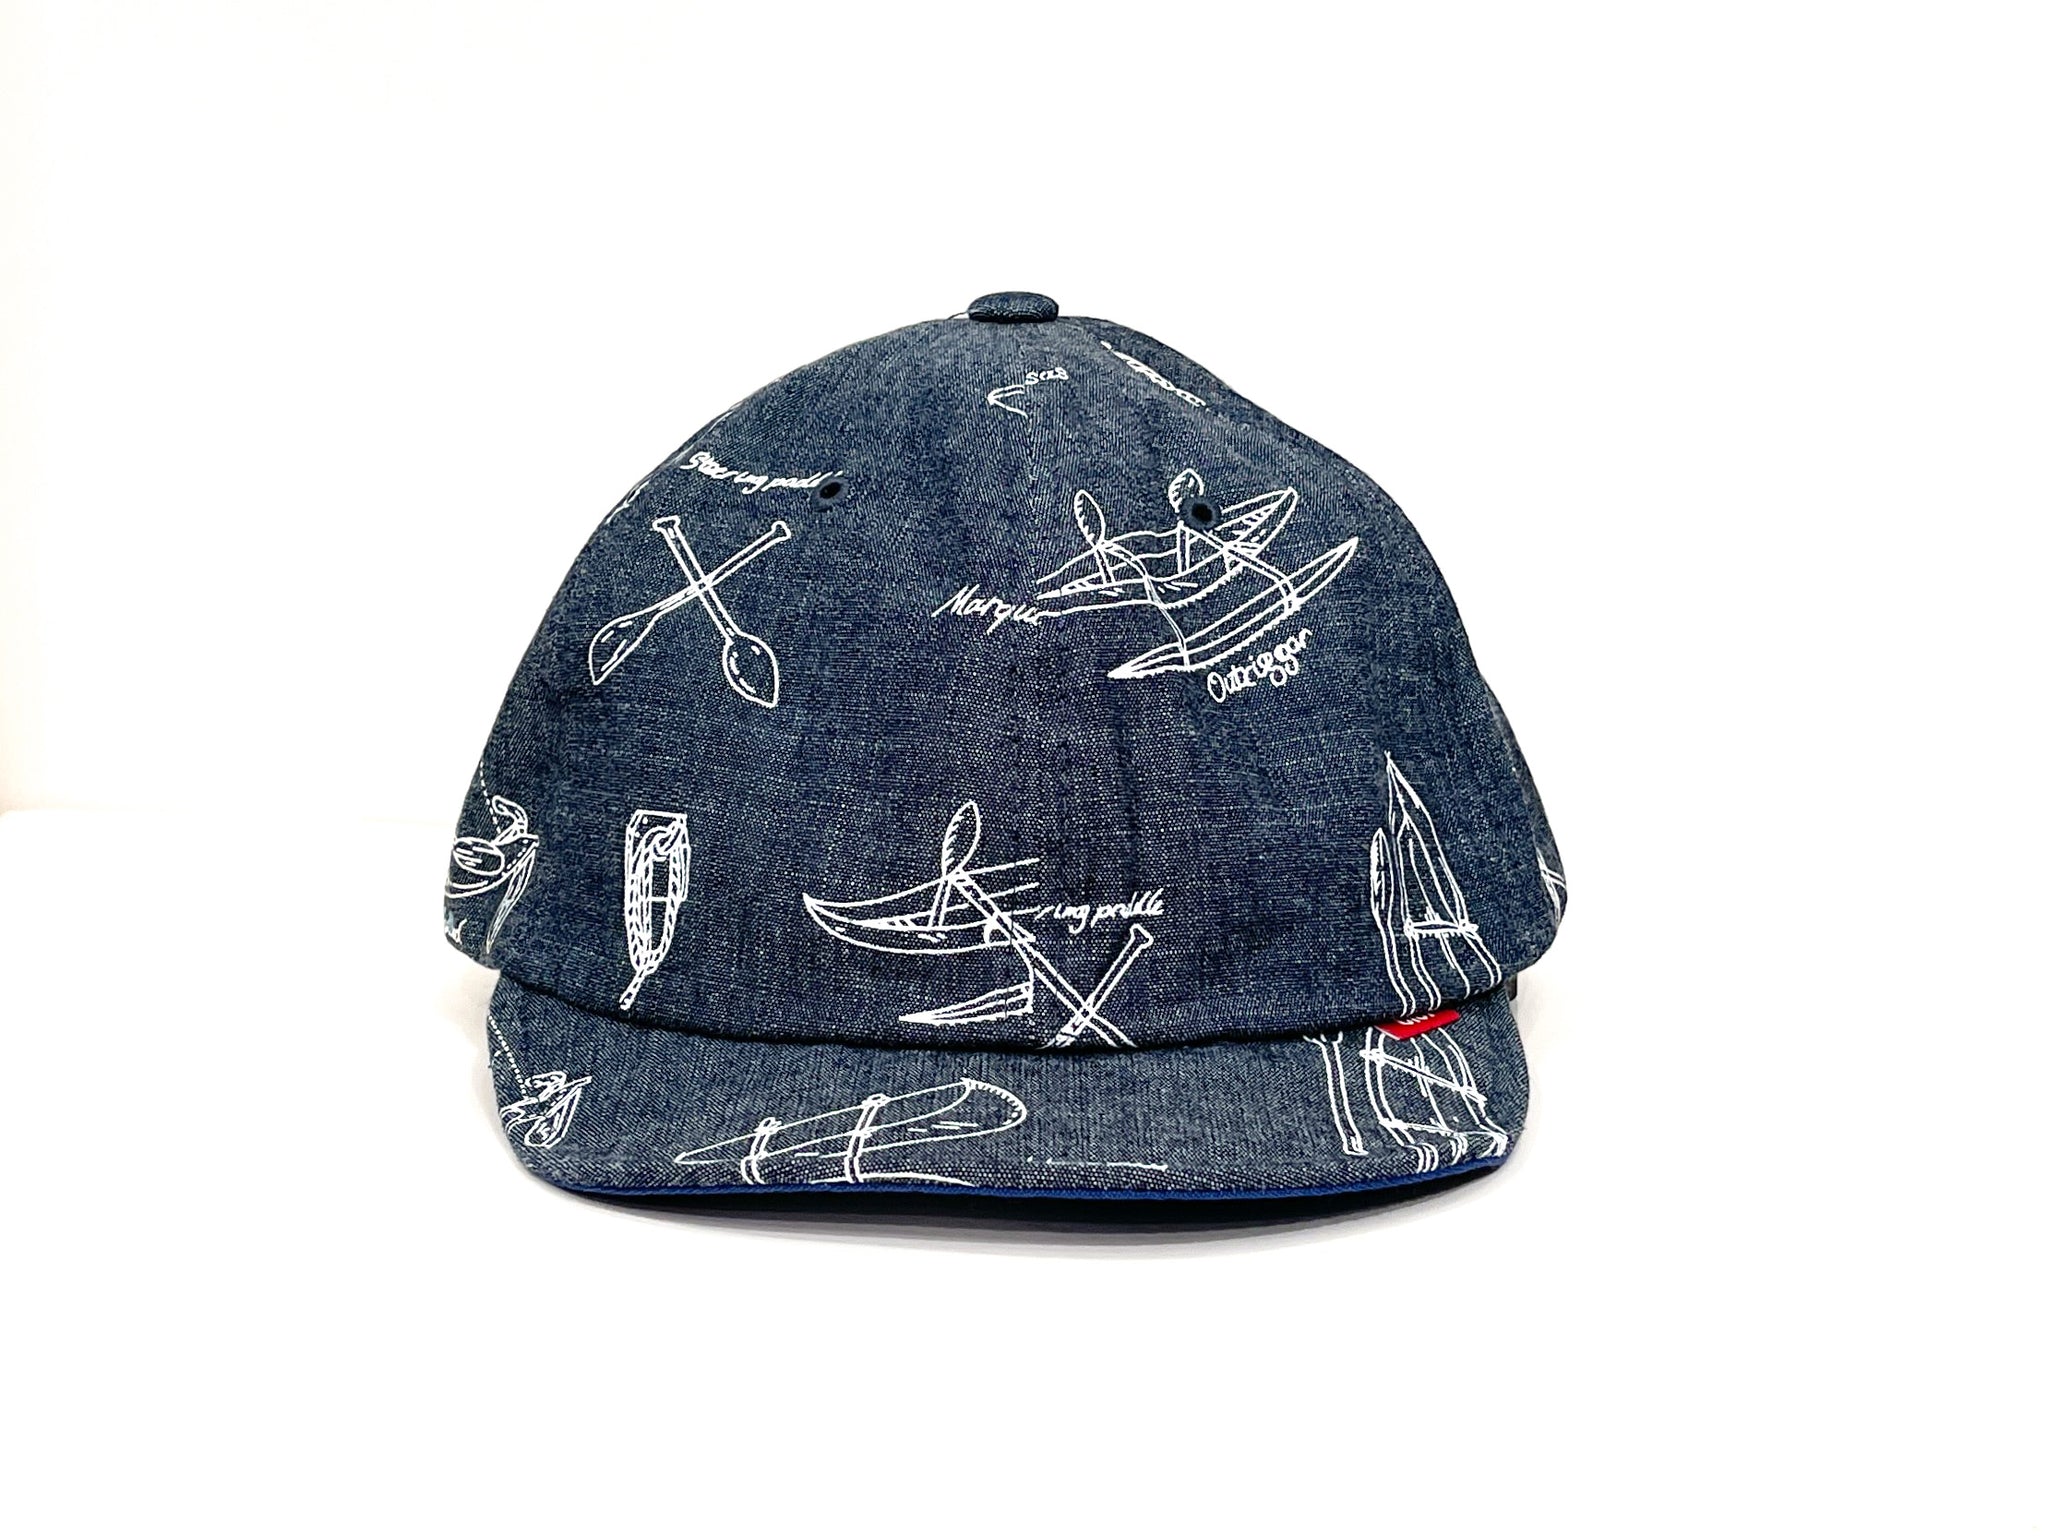 Clef Puddle Wired Baseball Cap RB3613